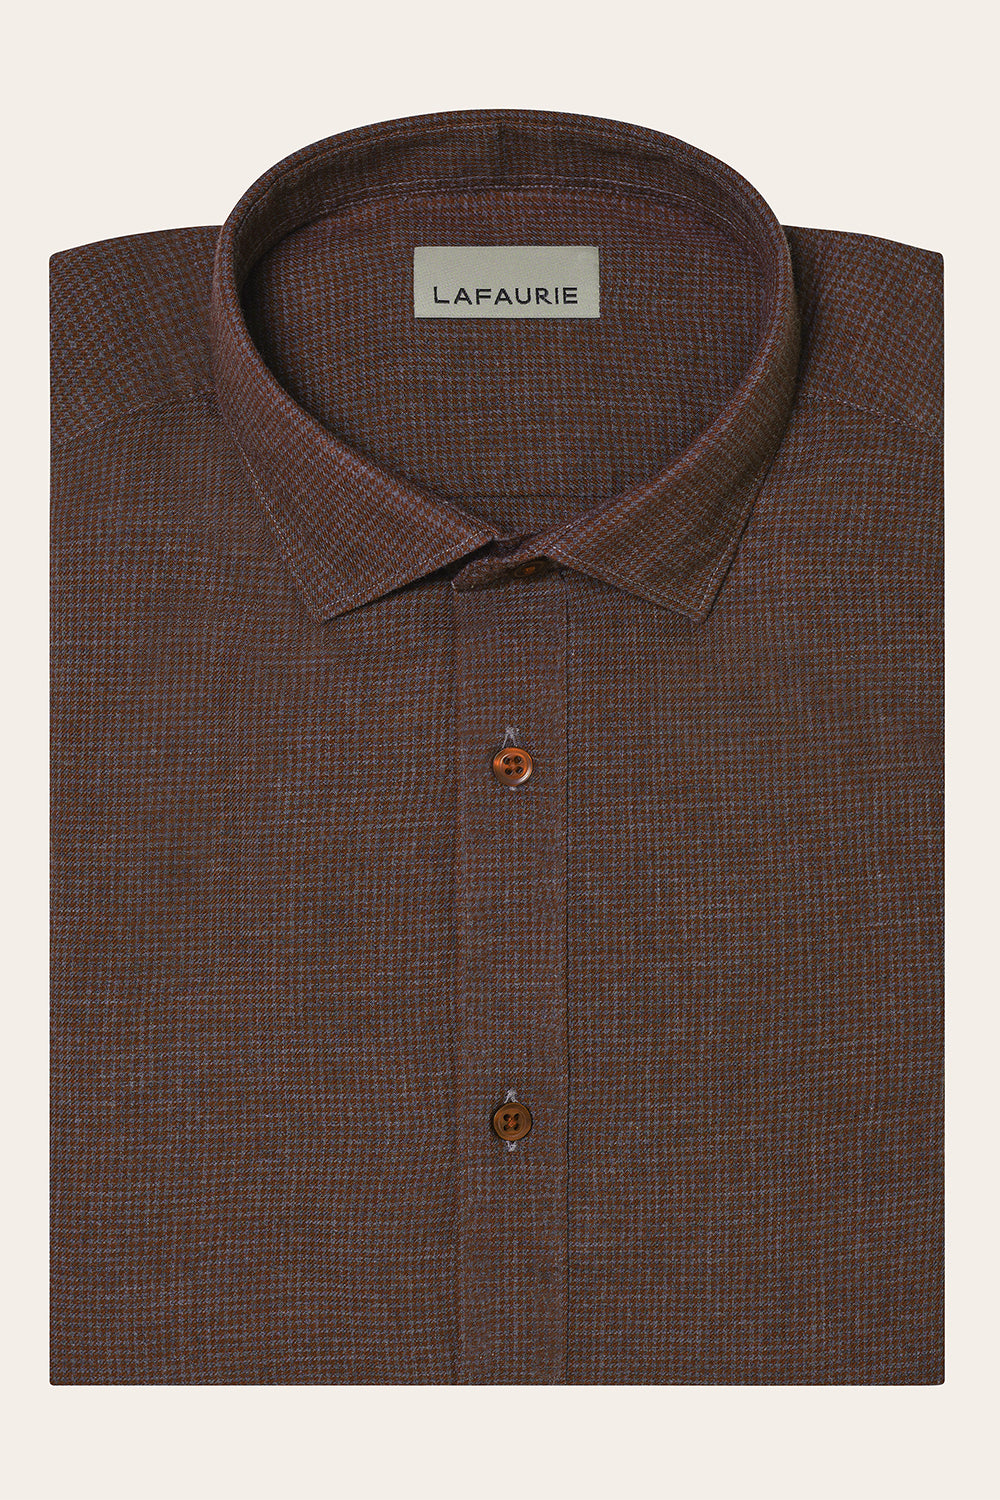 Chemise Thane - Bordeaux / Anthracite - Lafaurie